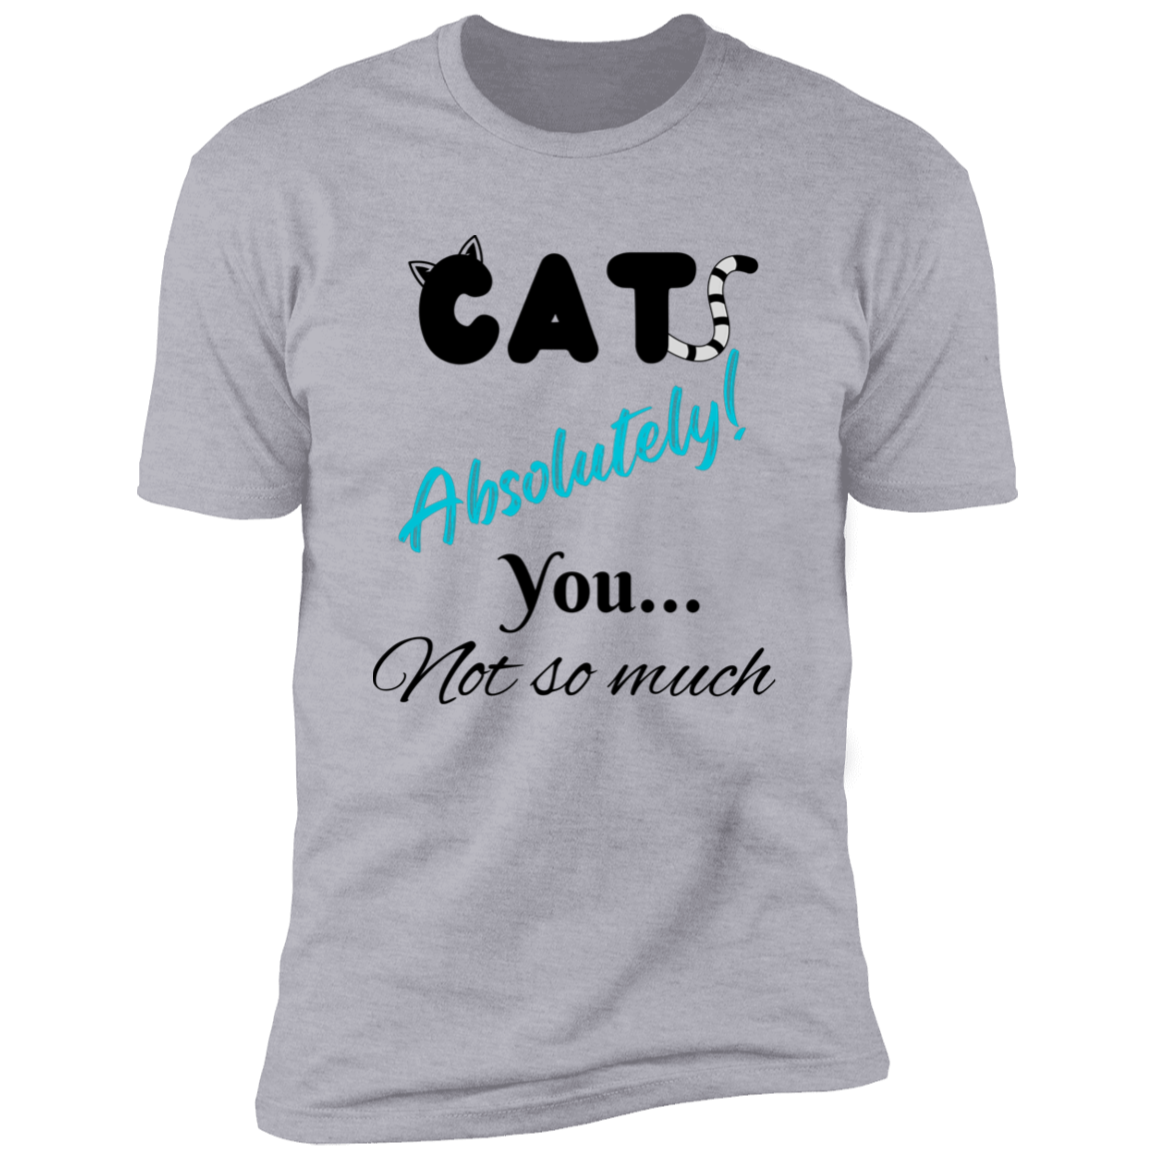 Cats Absolutely You Not So Much T-shirt, Cat Shirt for humans , in light heather gray